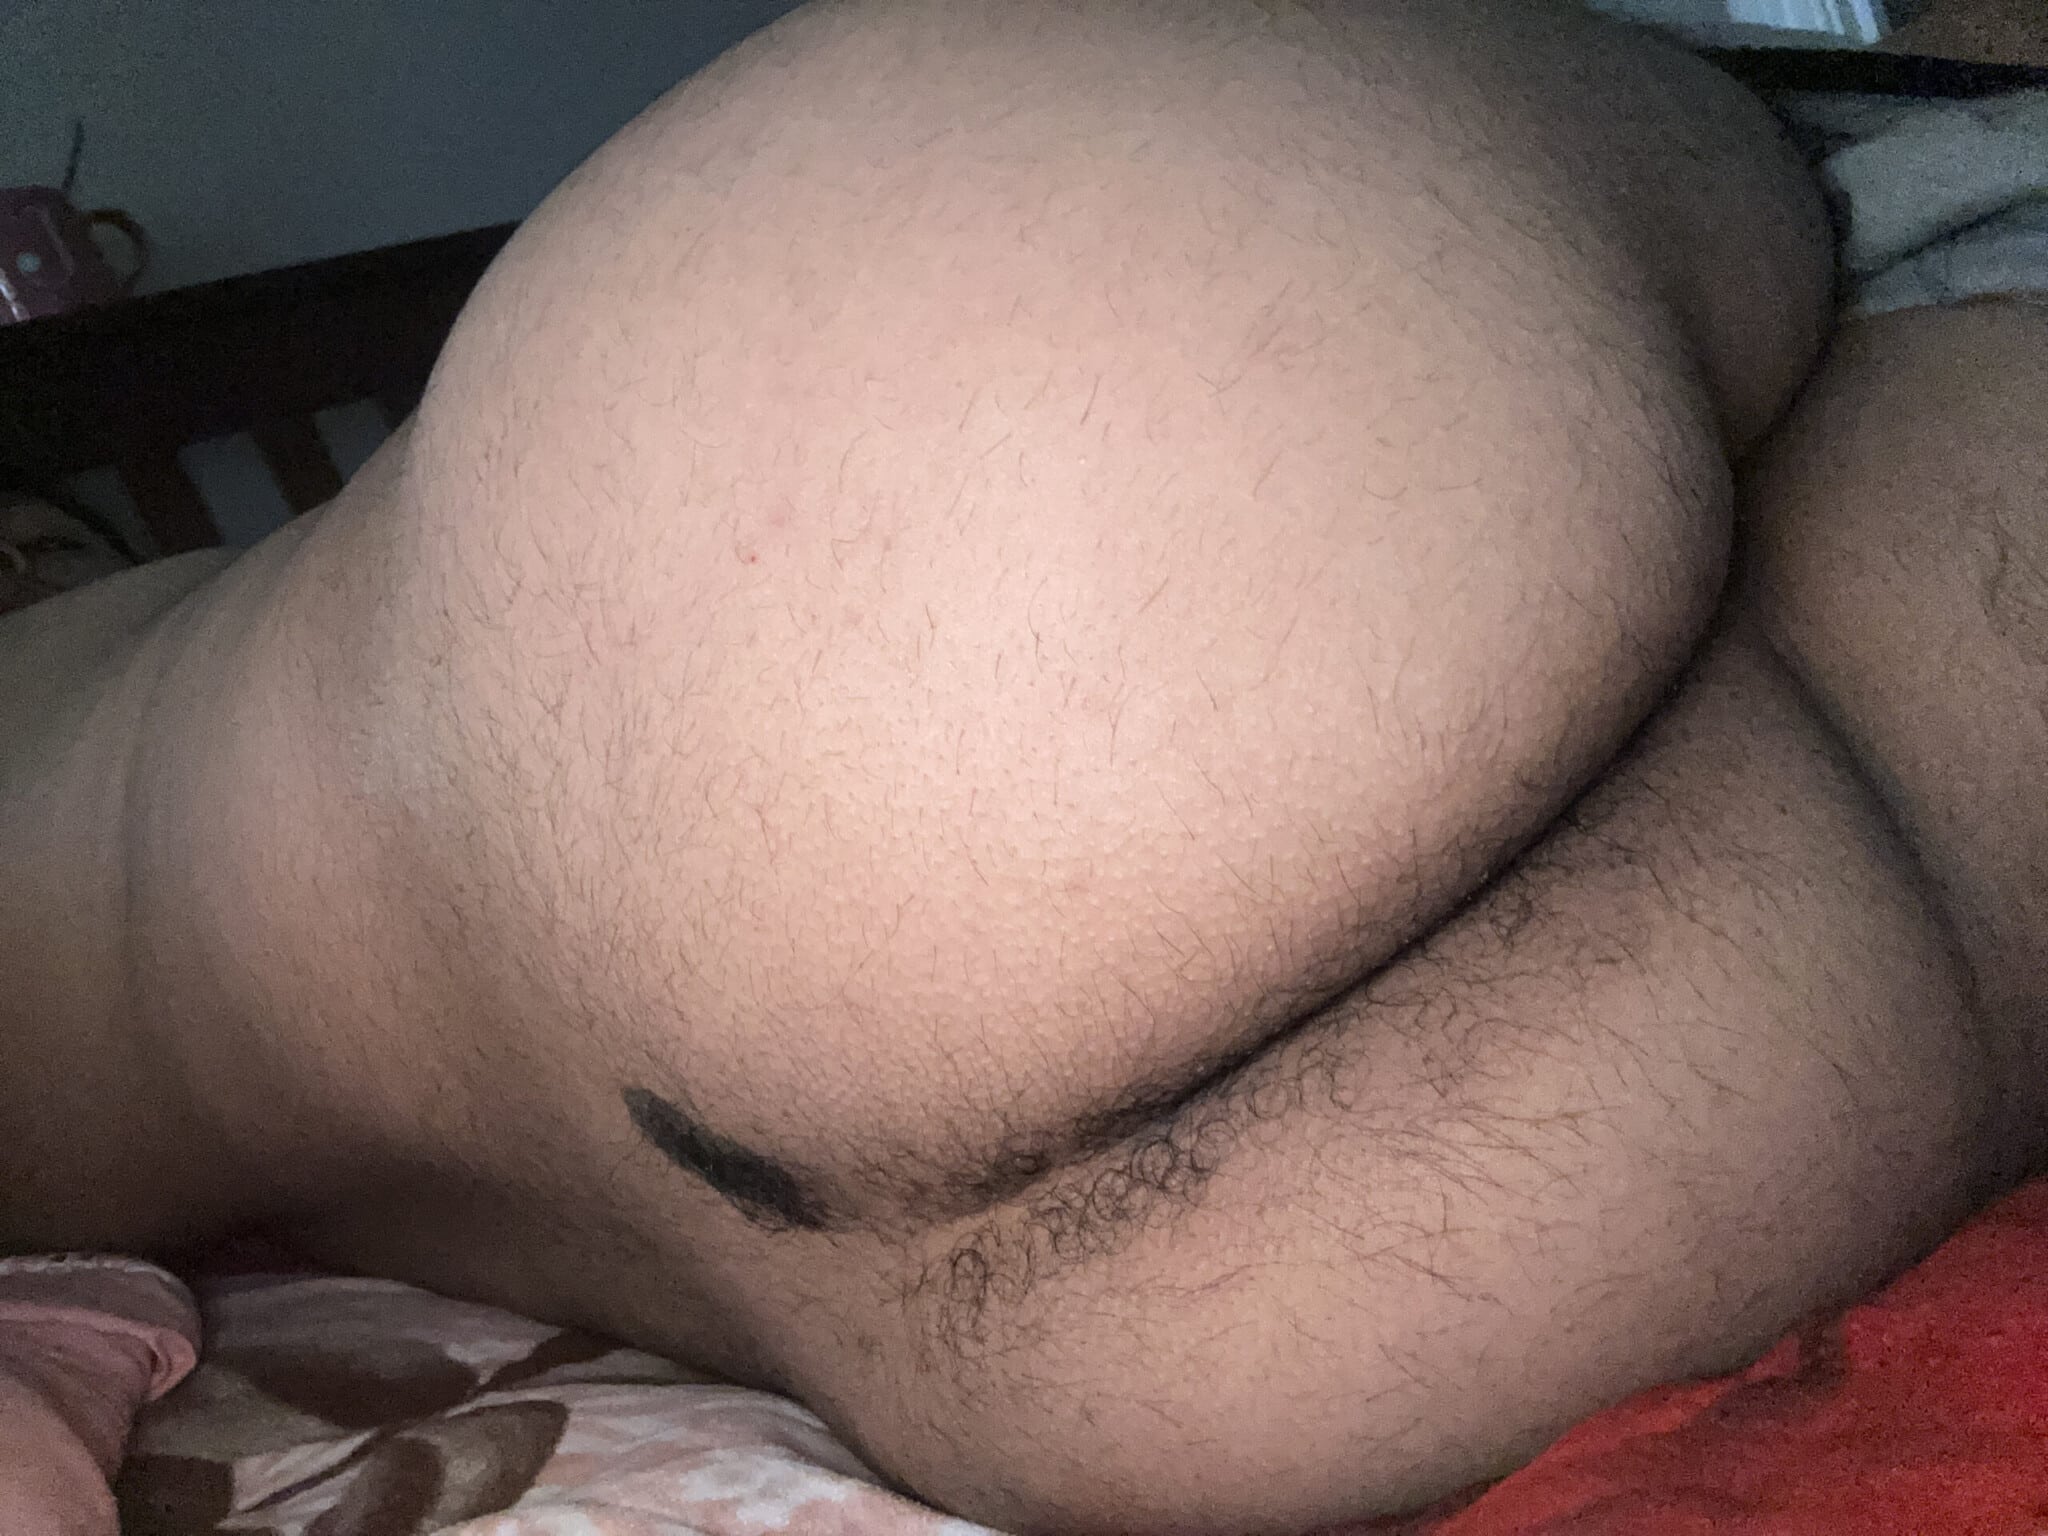 sexy big booty pawg panties down bent over pussy datawav - Big booty pic Sexxx - Ass Flash Pics